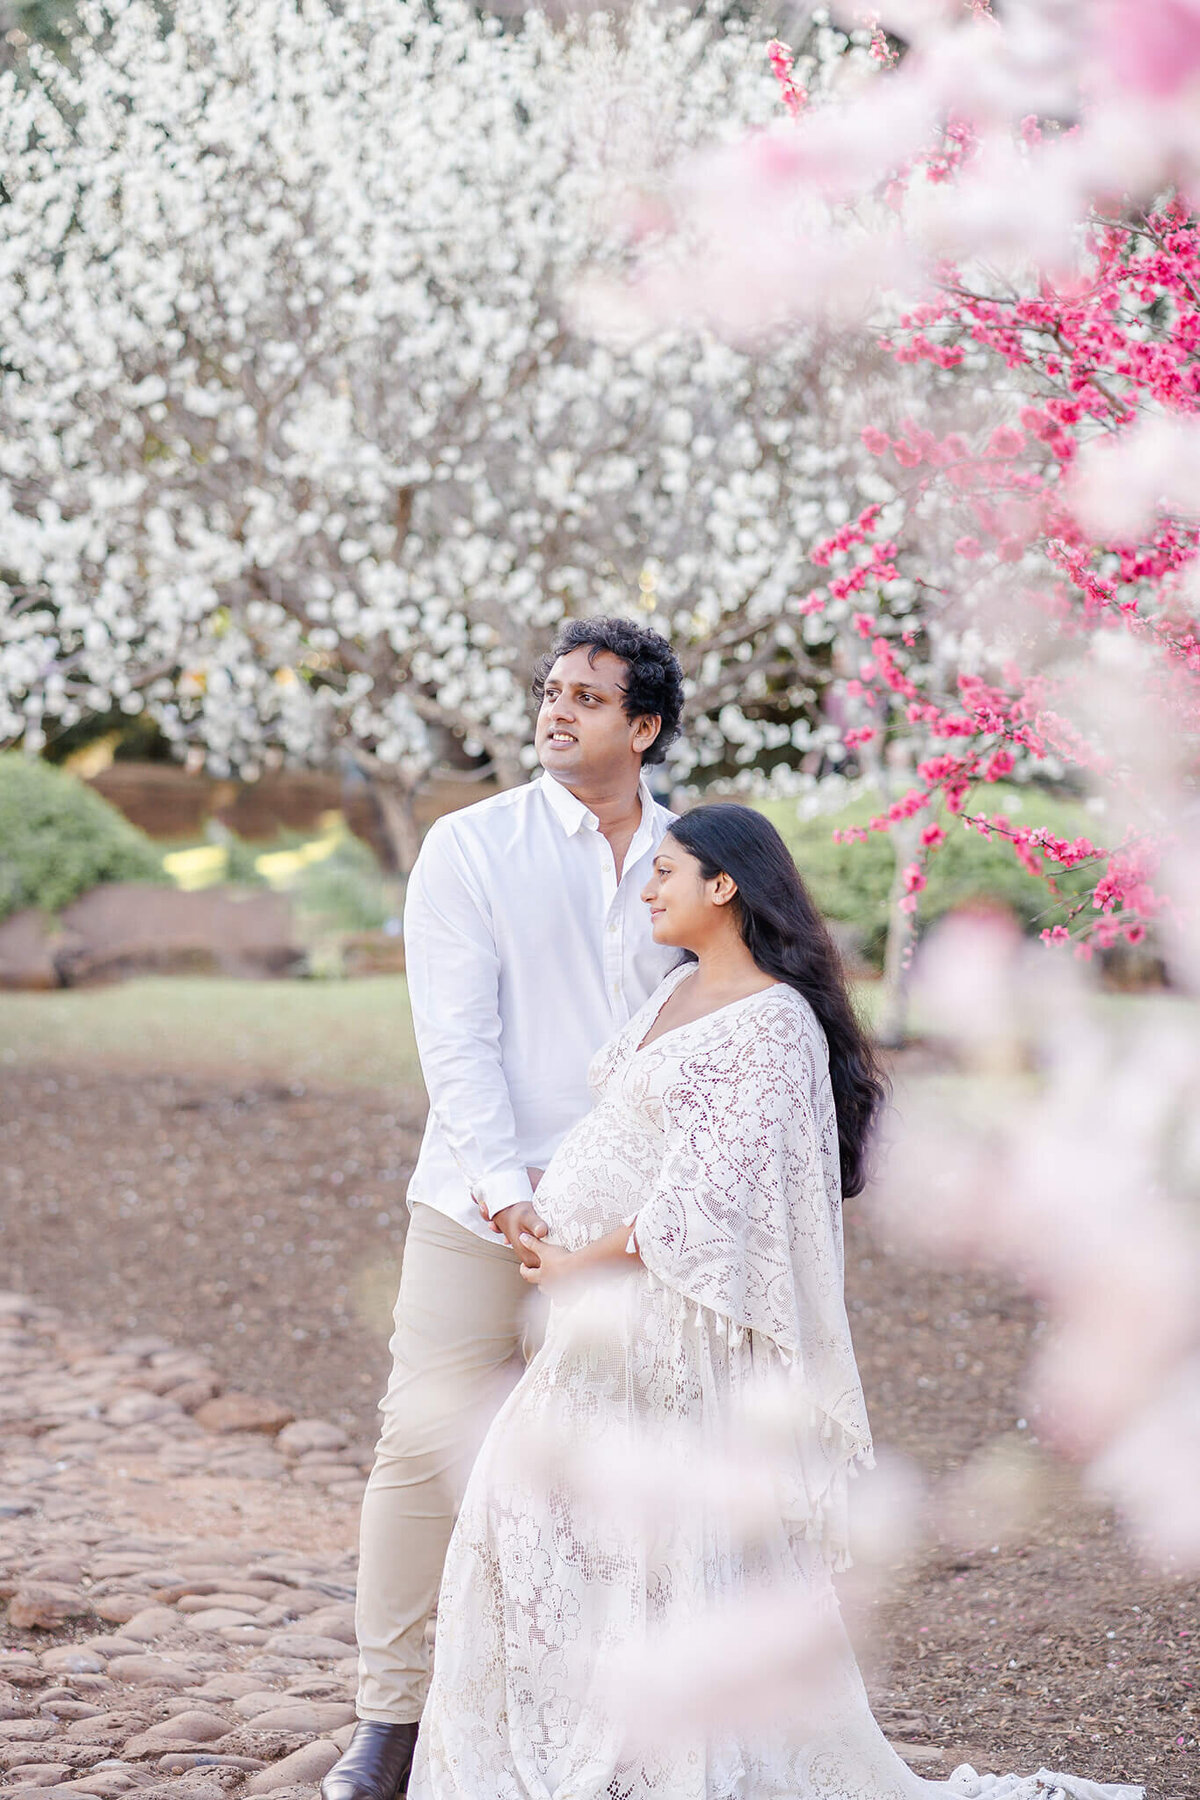 "Radiate in 'We Are Reclamation' beauty as a mum embraces the joy of pregnancy amidst Brisbane's Japanese garden's cherry blossoms